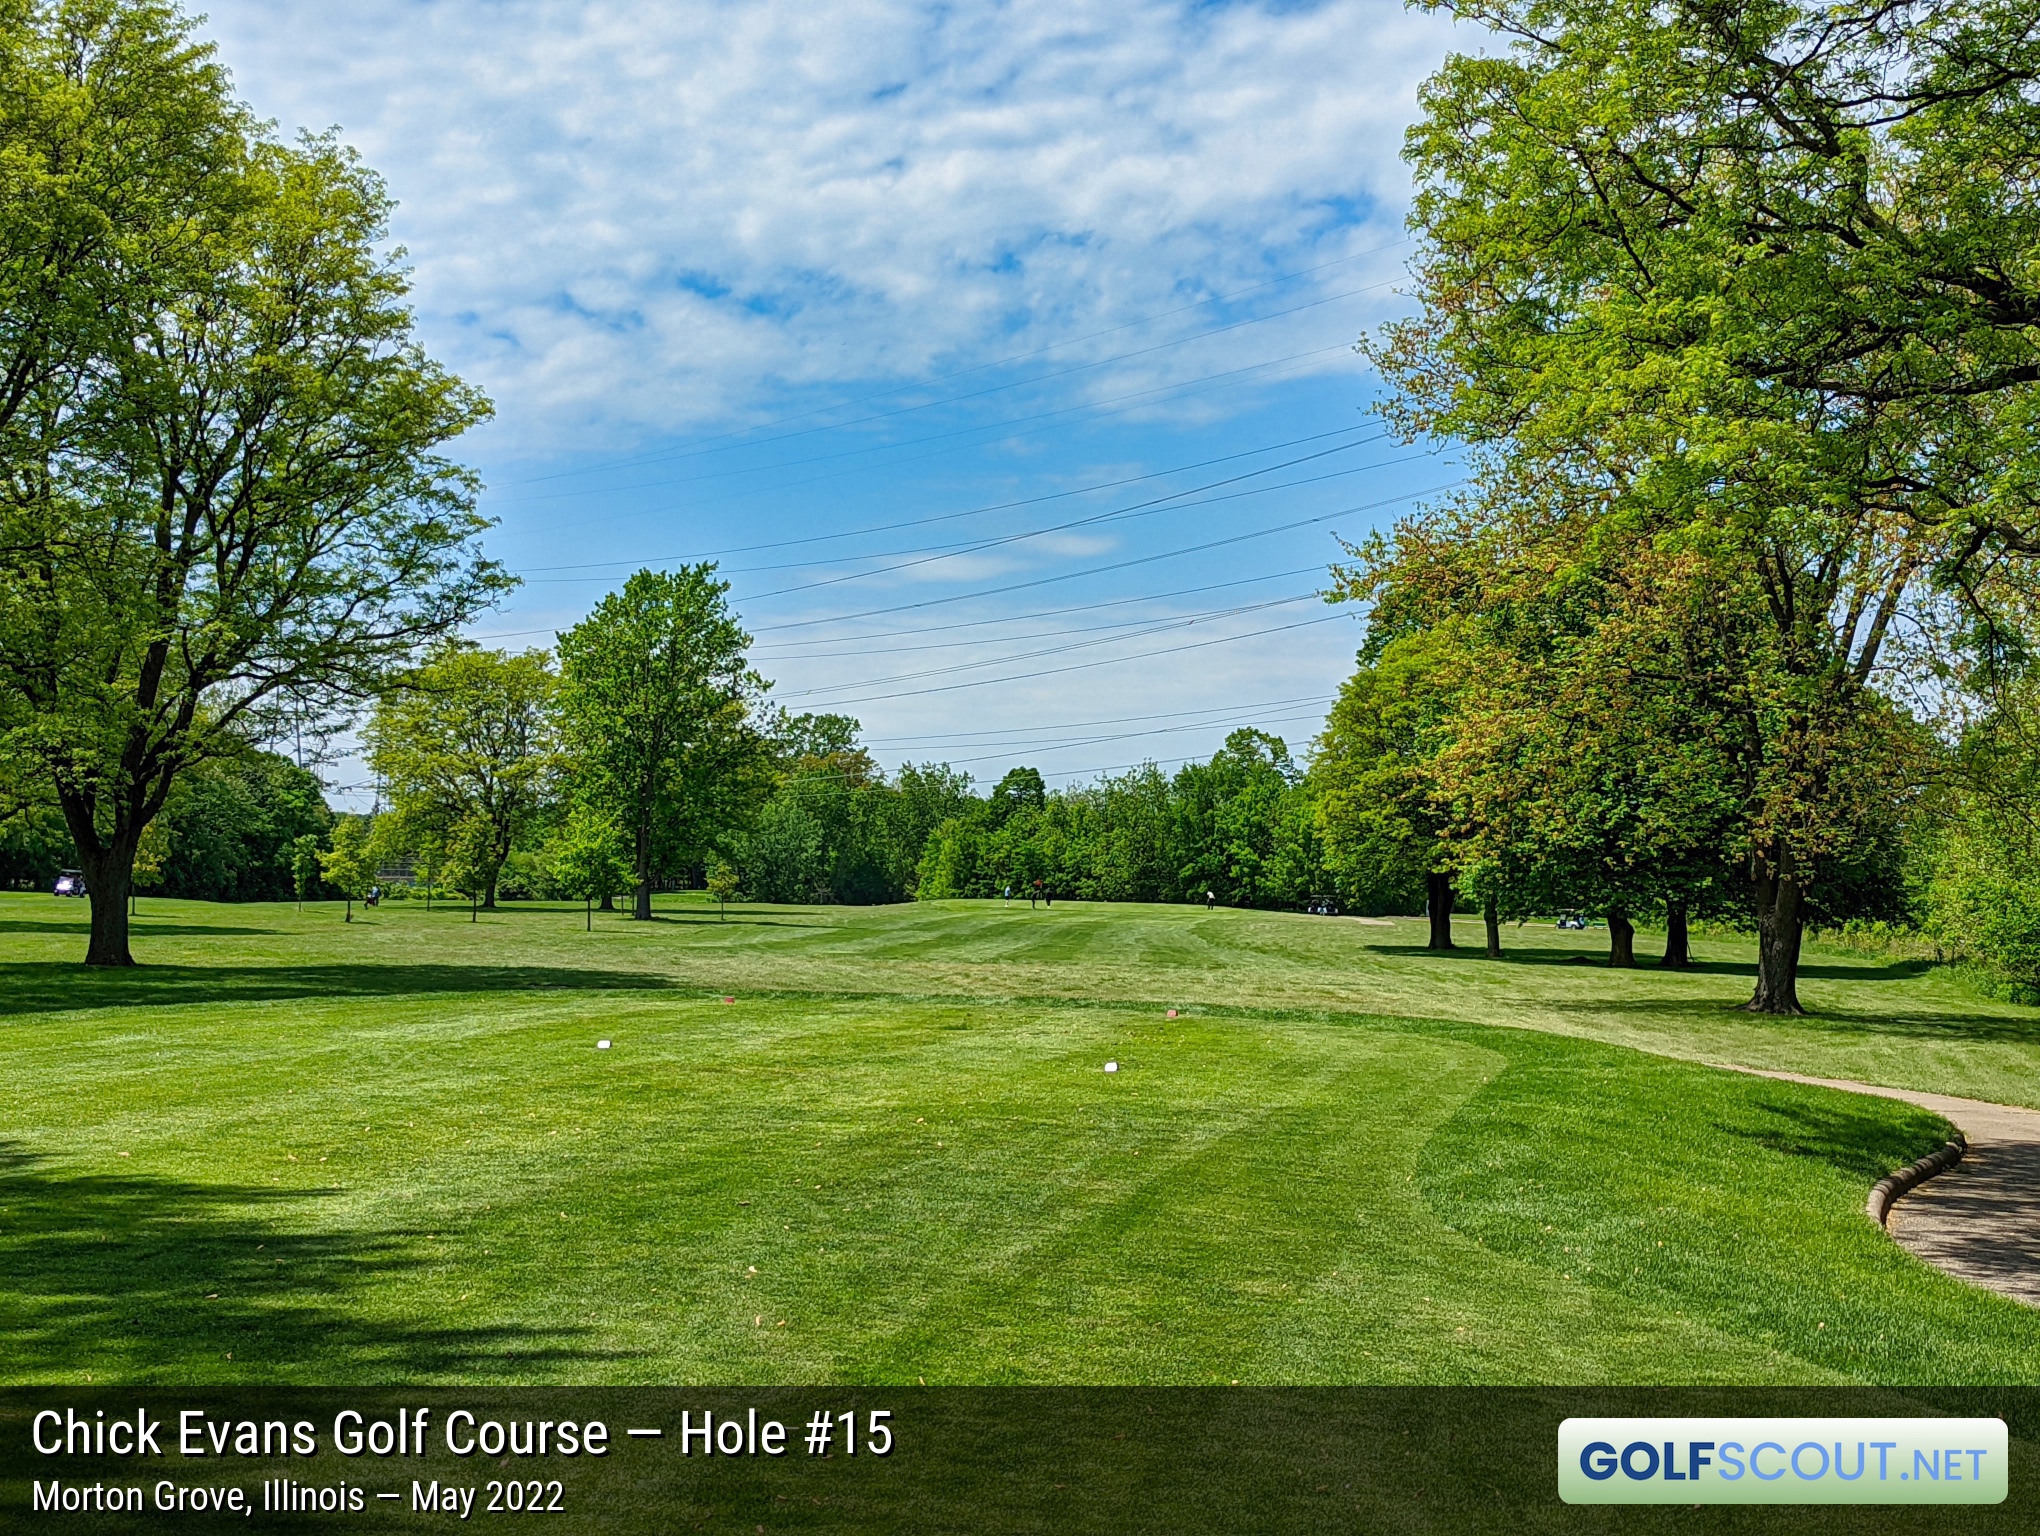 Photo of hole #15 at Chick Evans Golf Course in Morton Grove, Illinois. 